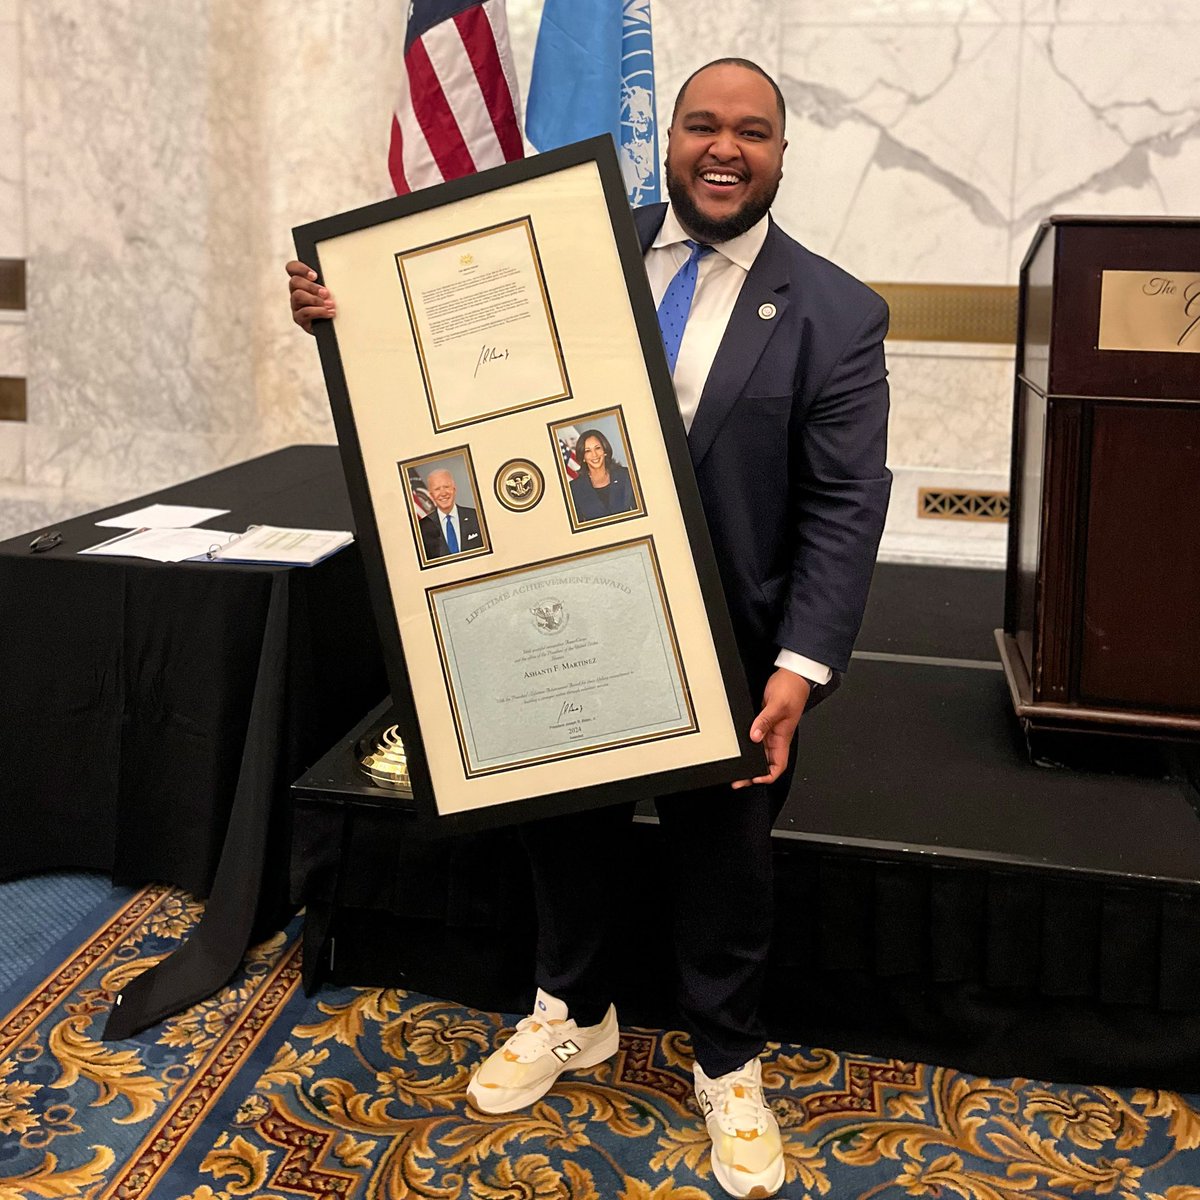 This kid from PG County is the recipient of the Presidential Lifetime Achievement Award! Words can’t describe how grateful I am for this recognition. I’ve dedicated my life to public service because to me there’s no higher honor than serving my neighbors. This award is for us.